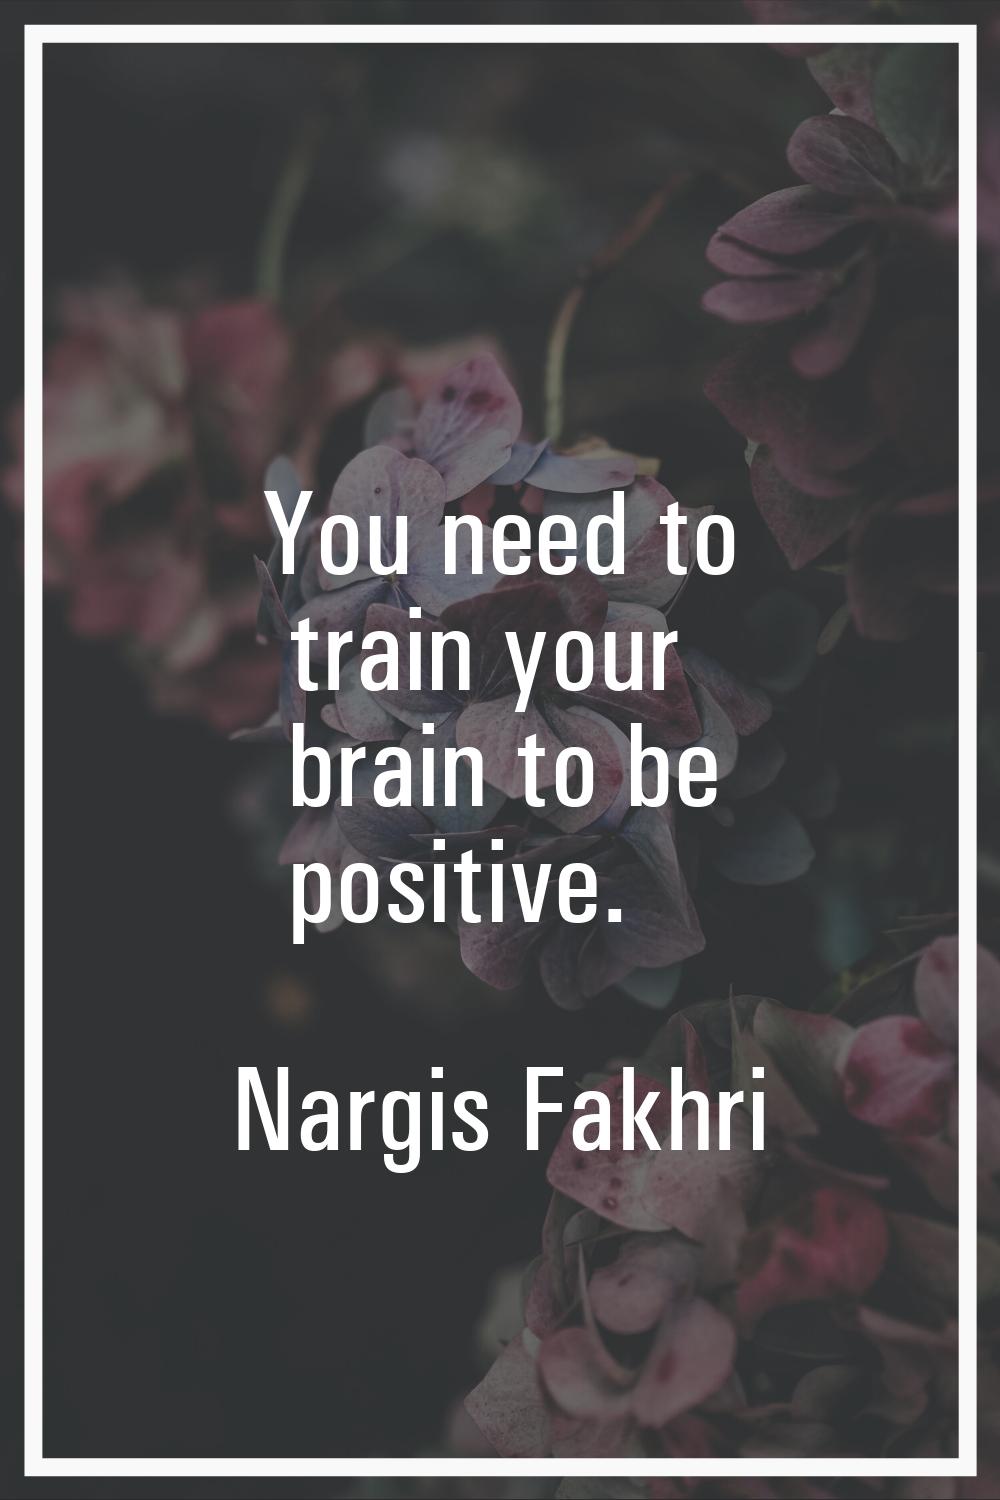 You need to train your brain to be positive.